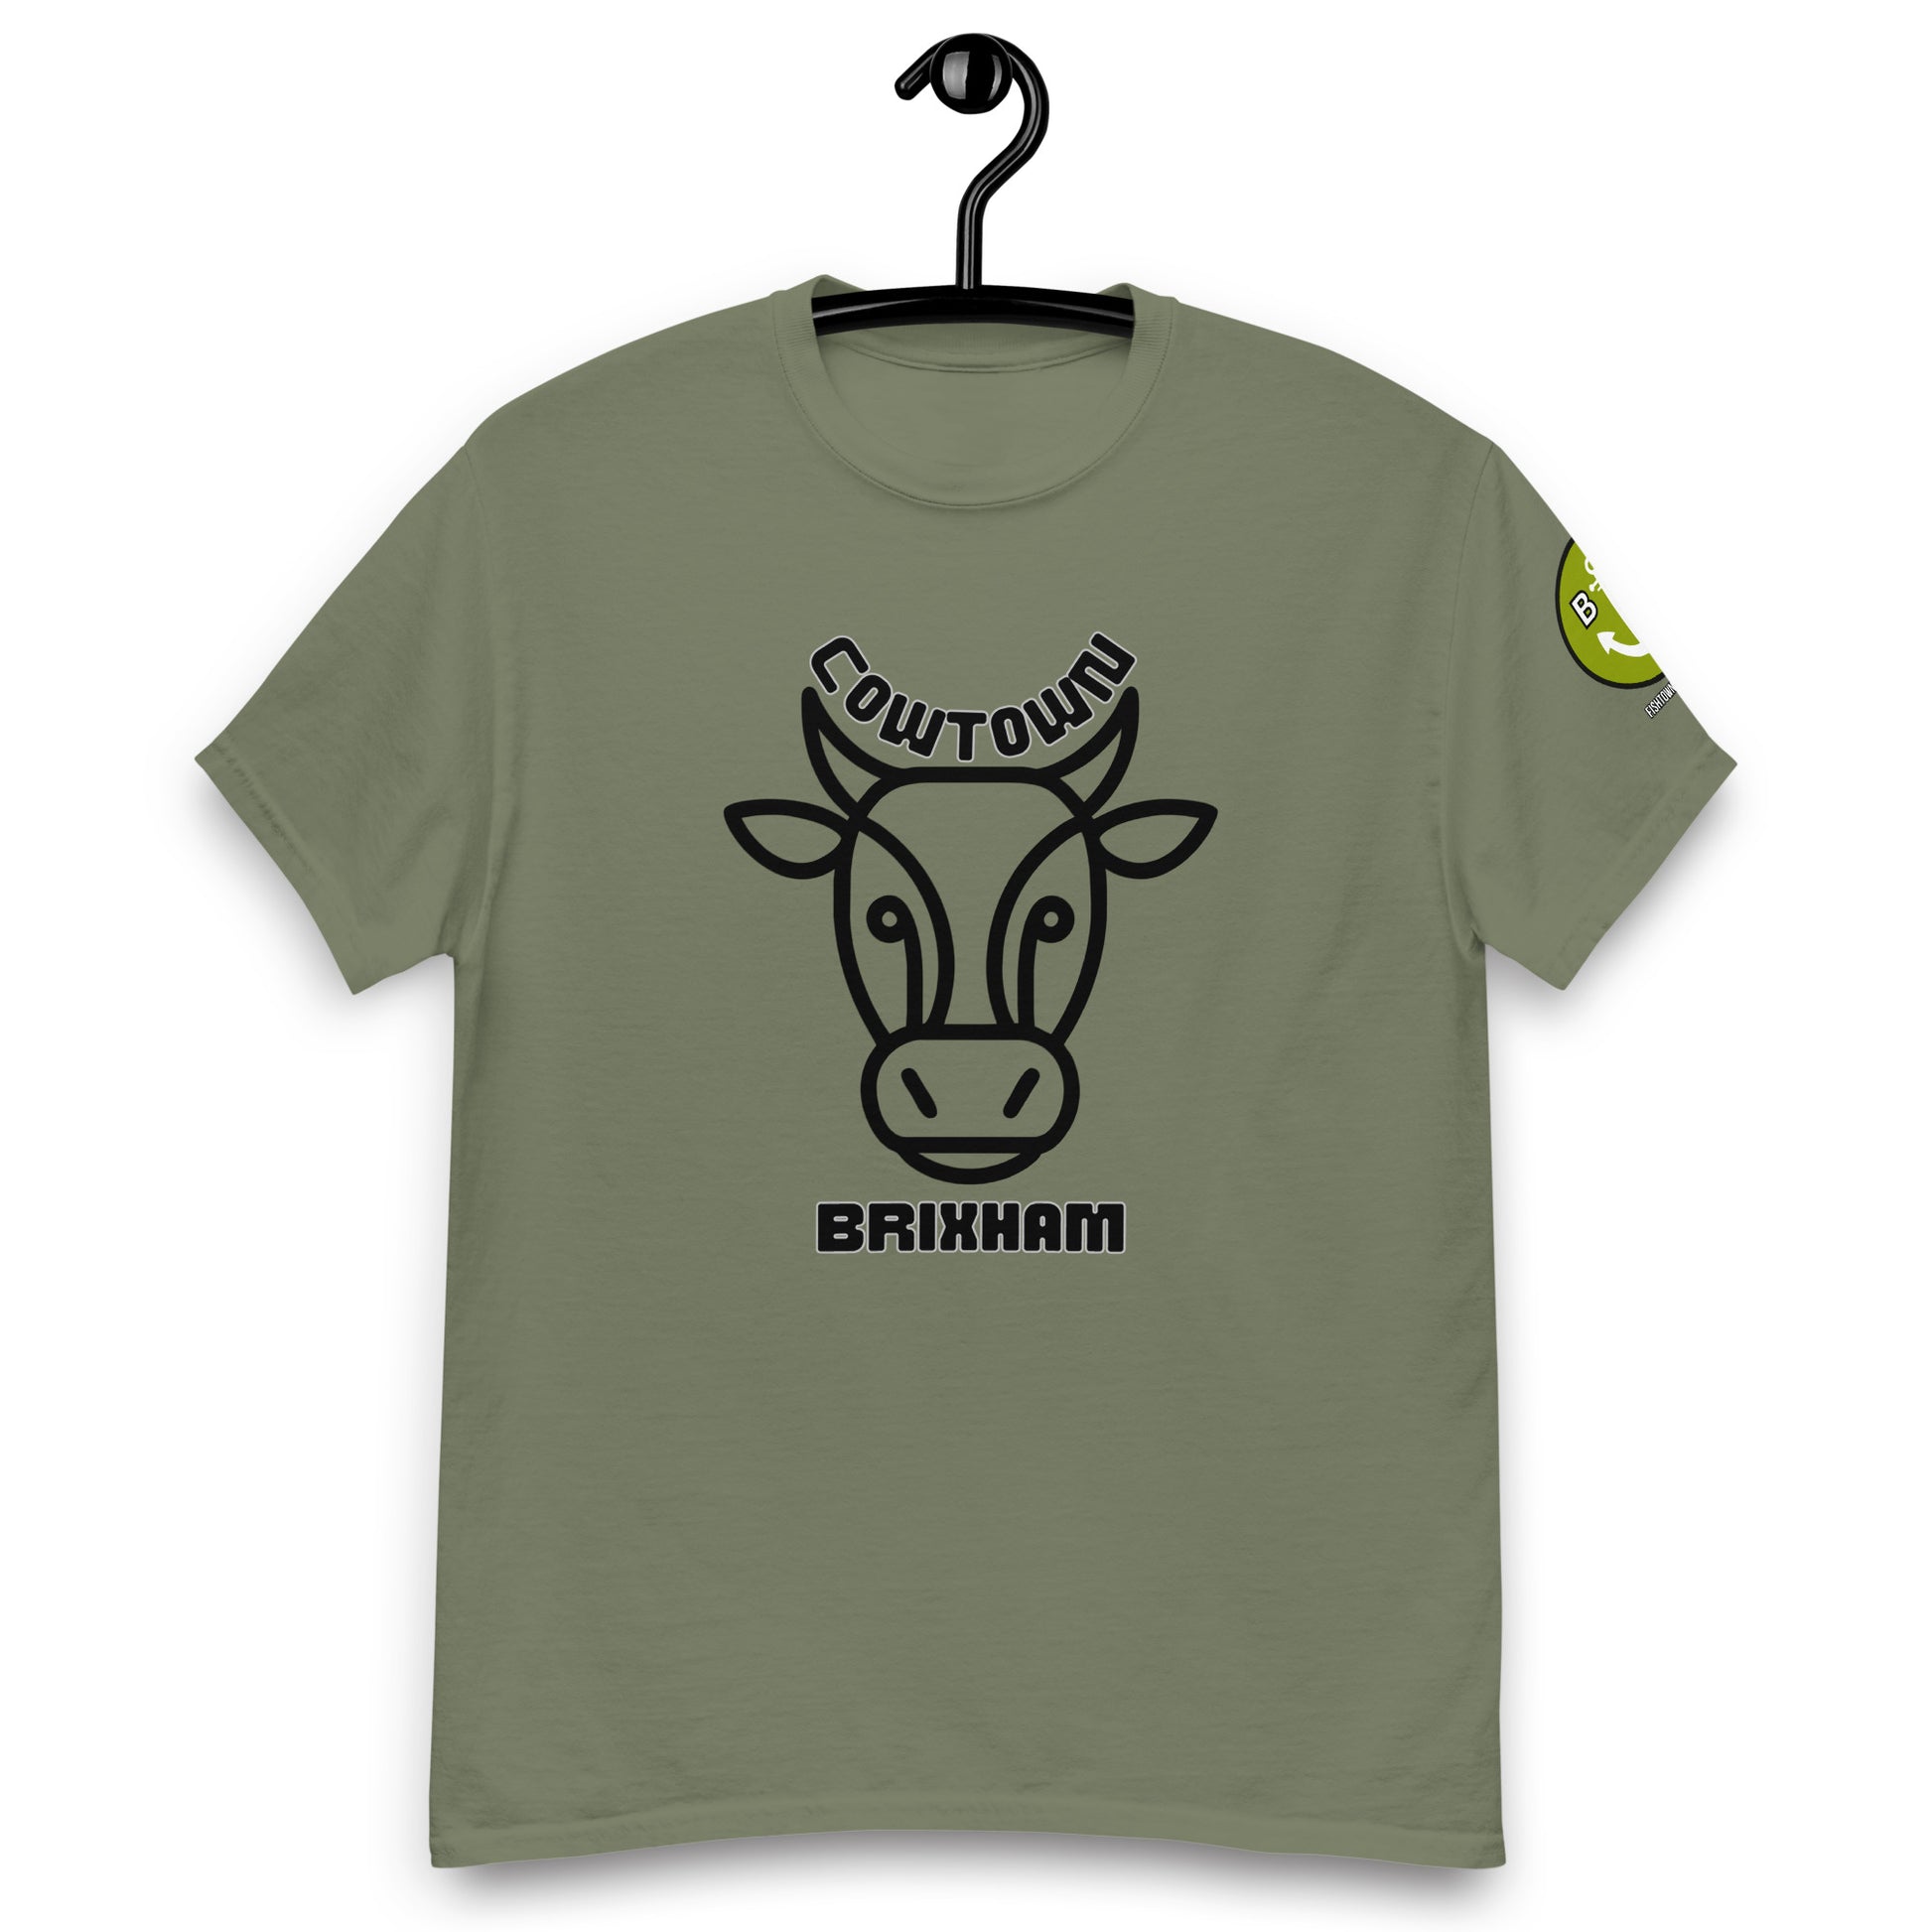 BRIXHAM BM Cowtown Men's classic tee front with logo on left sleeve military green